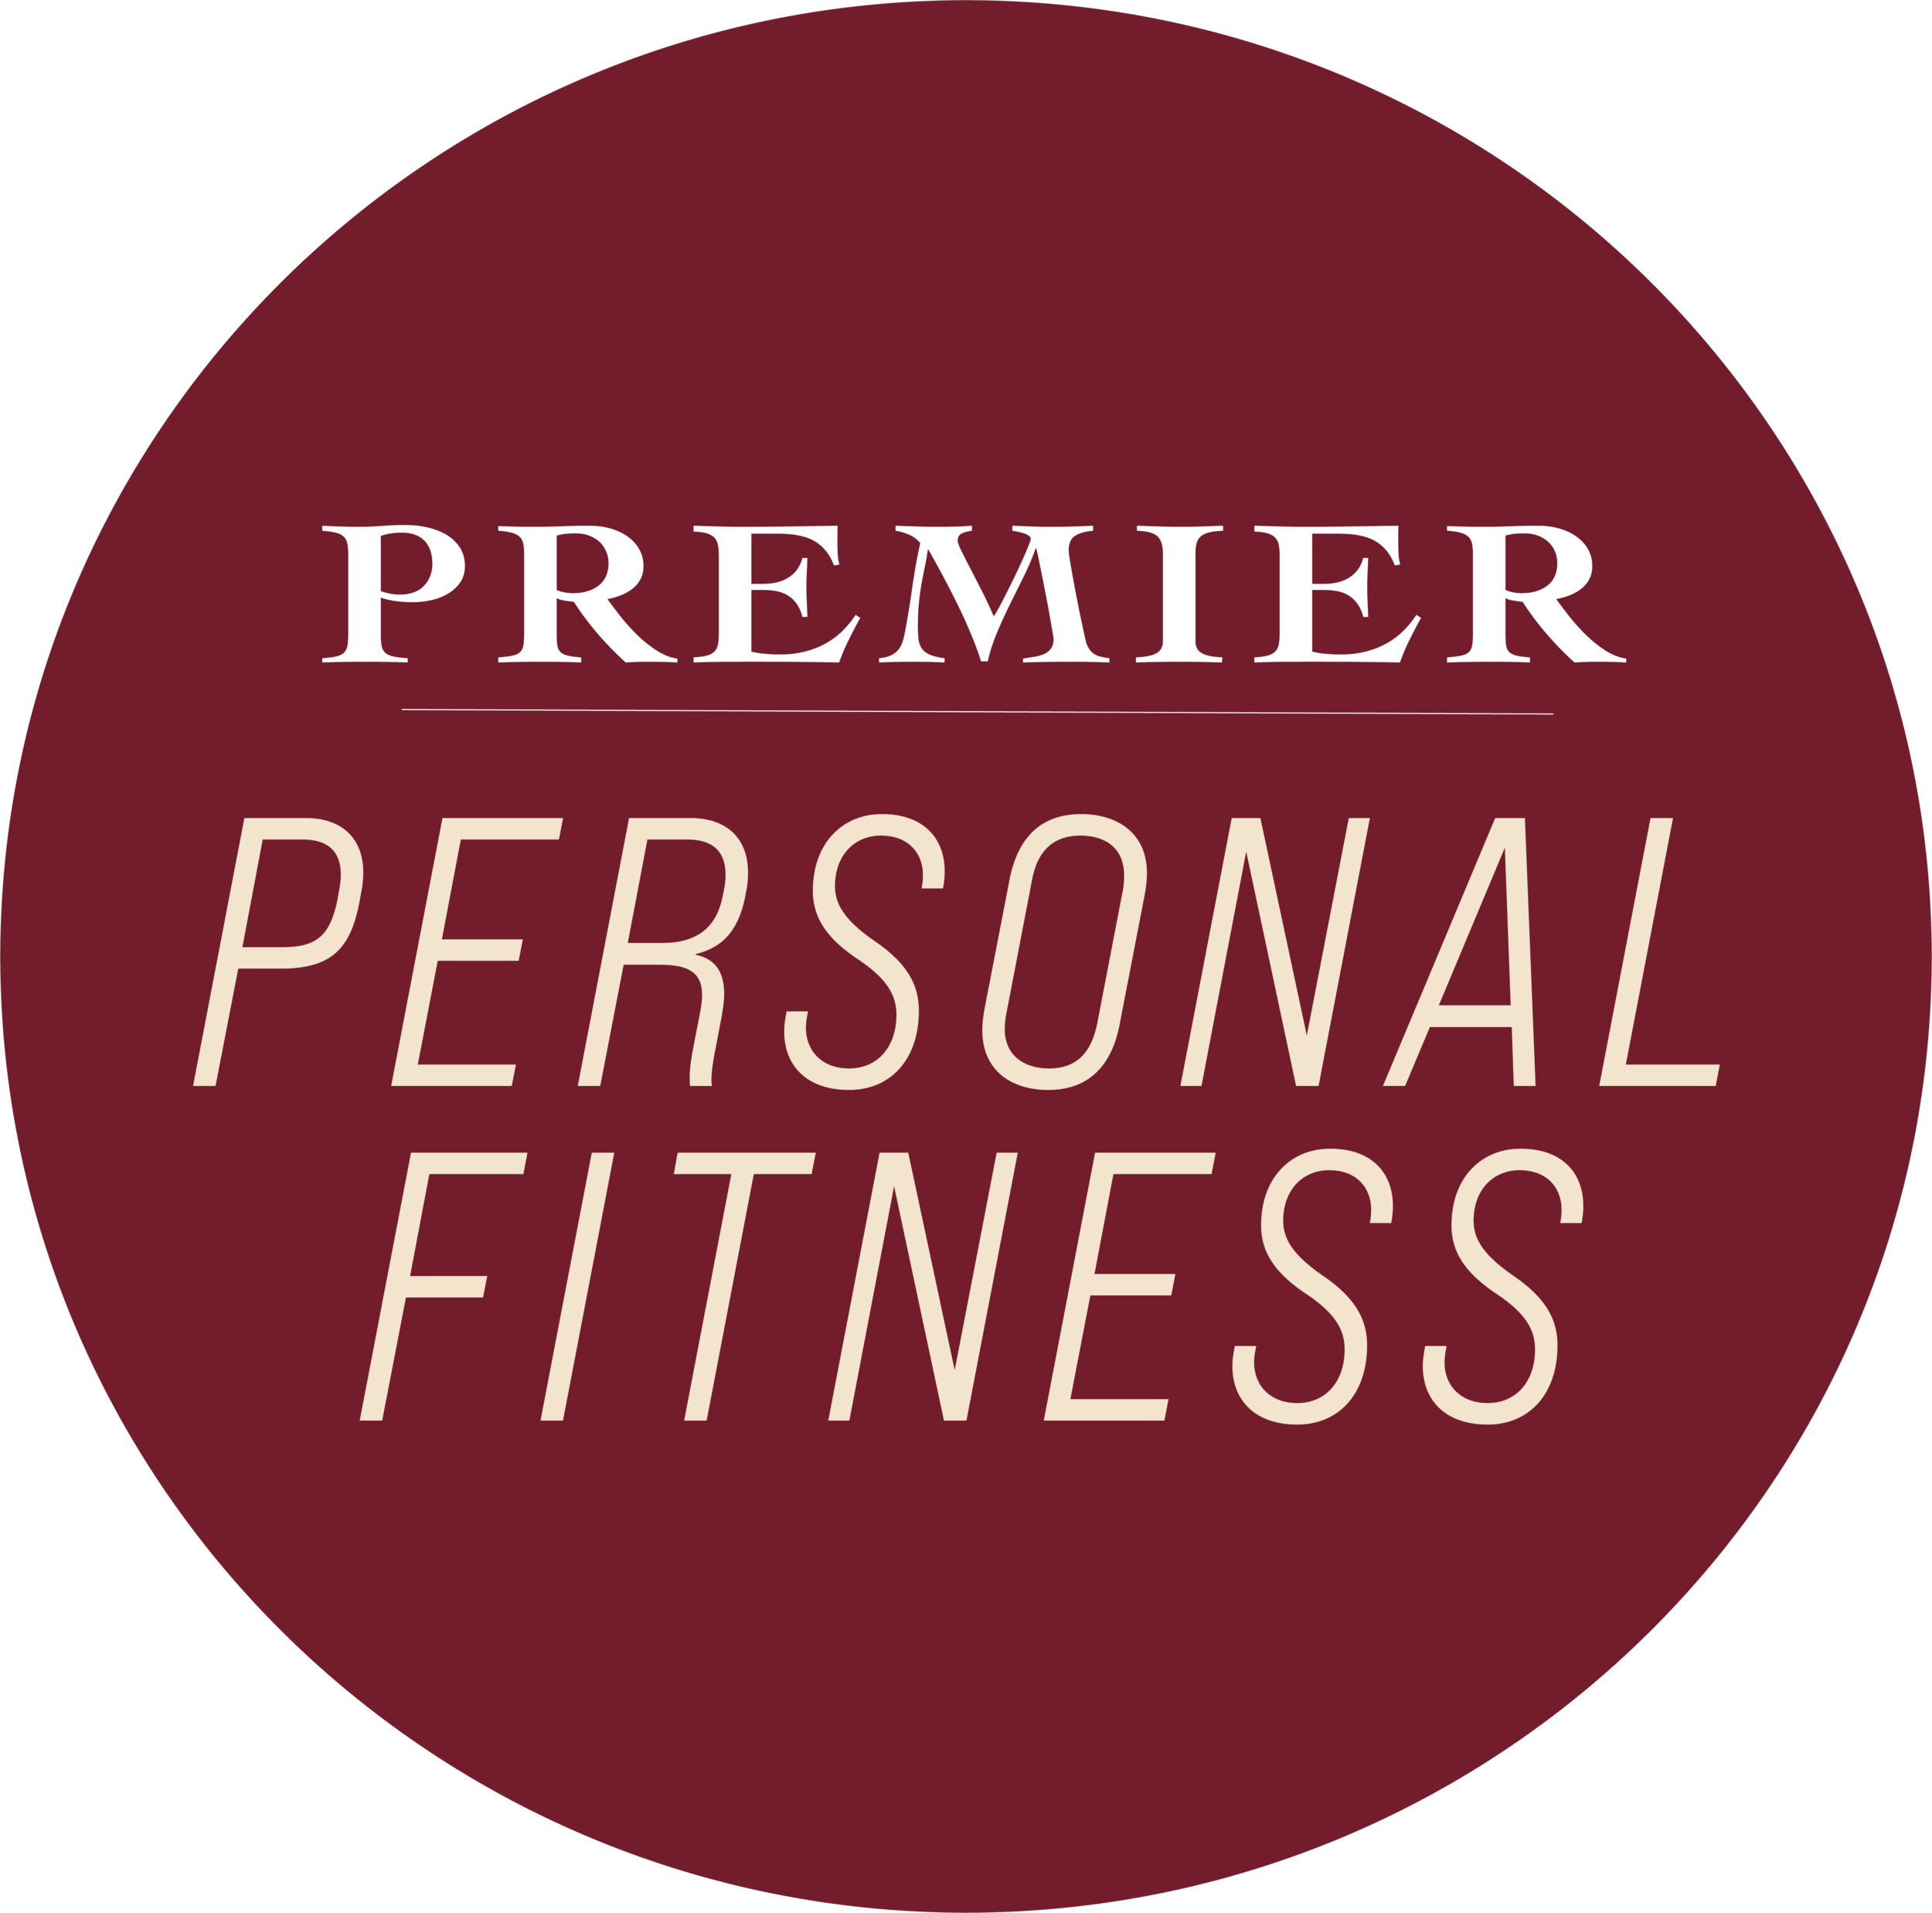 Premier Personal Fitness